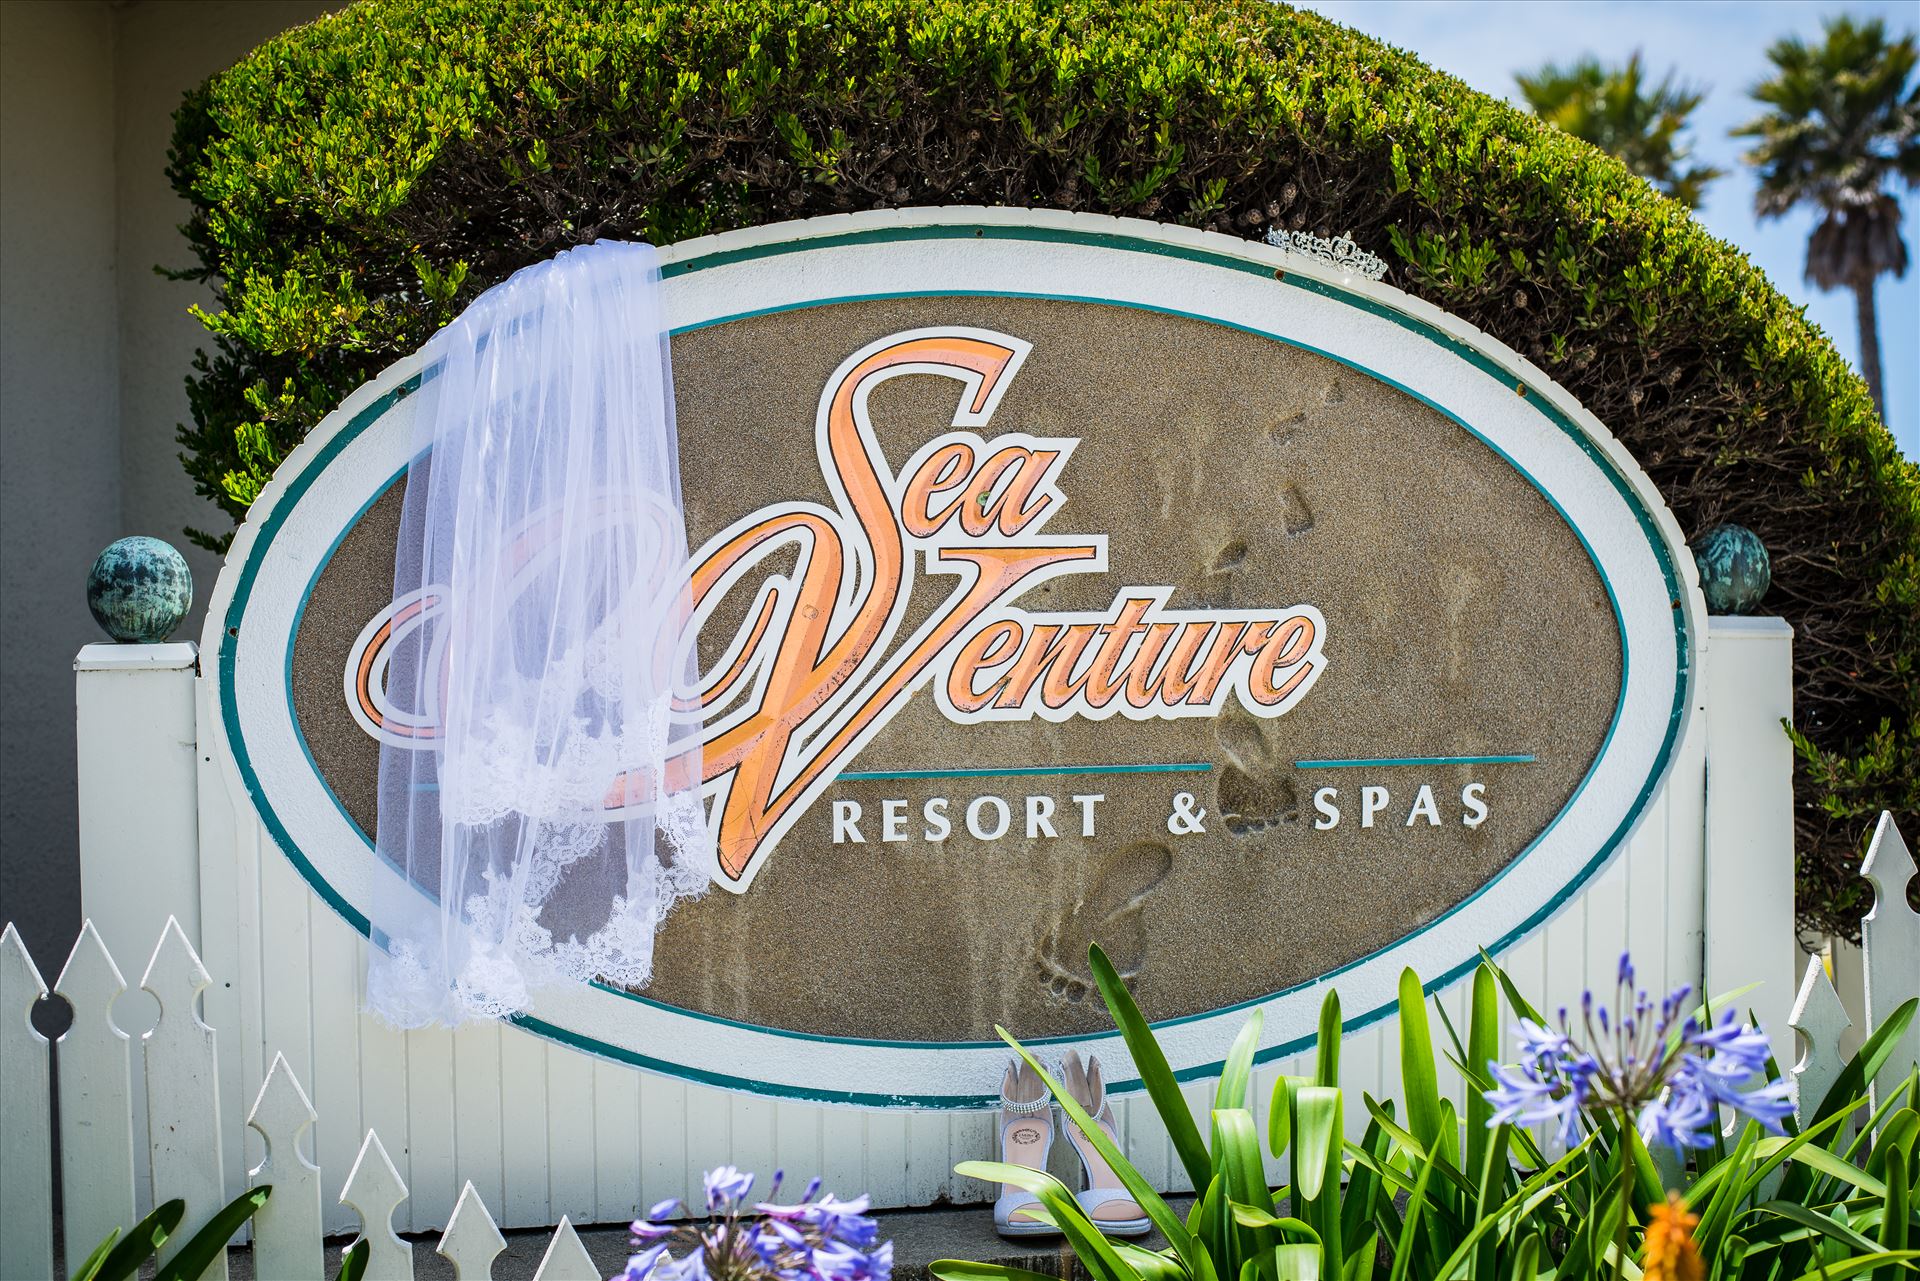 Jessica and Michael 02 - Sea Venture Resort and Spa Wedding Photography by Mirror's Edge Photography in Pismo Beach, California. Wedding Day Sign by Sarah Williams